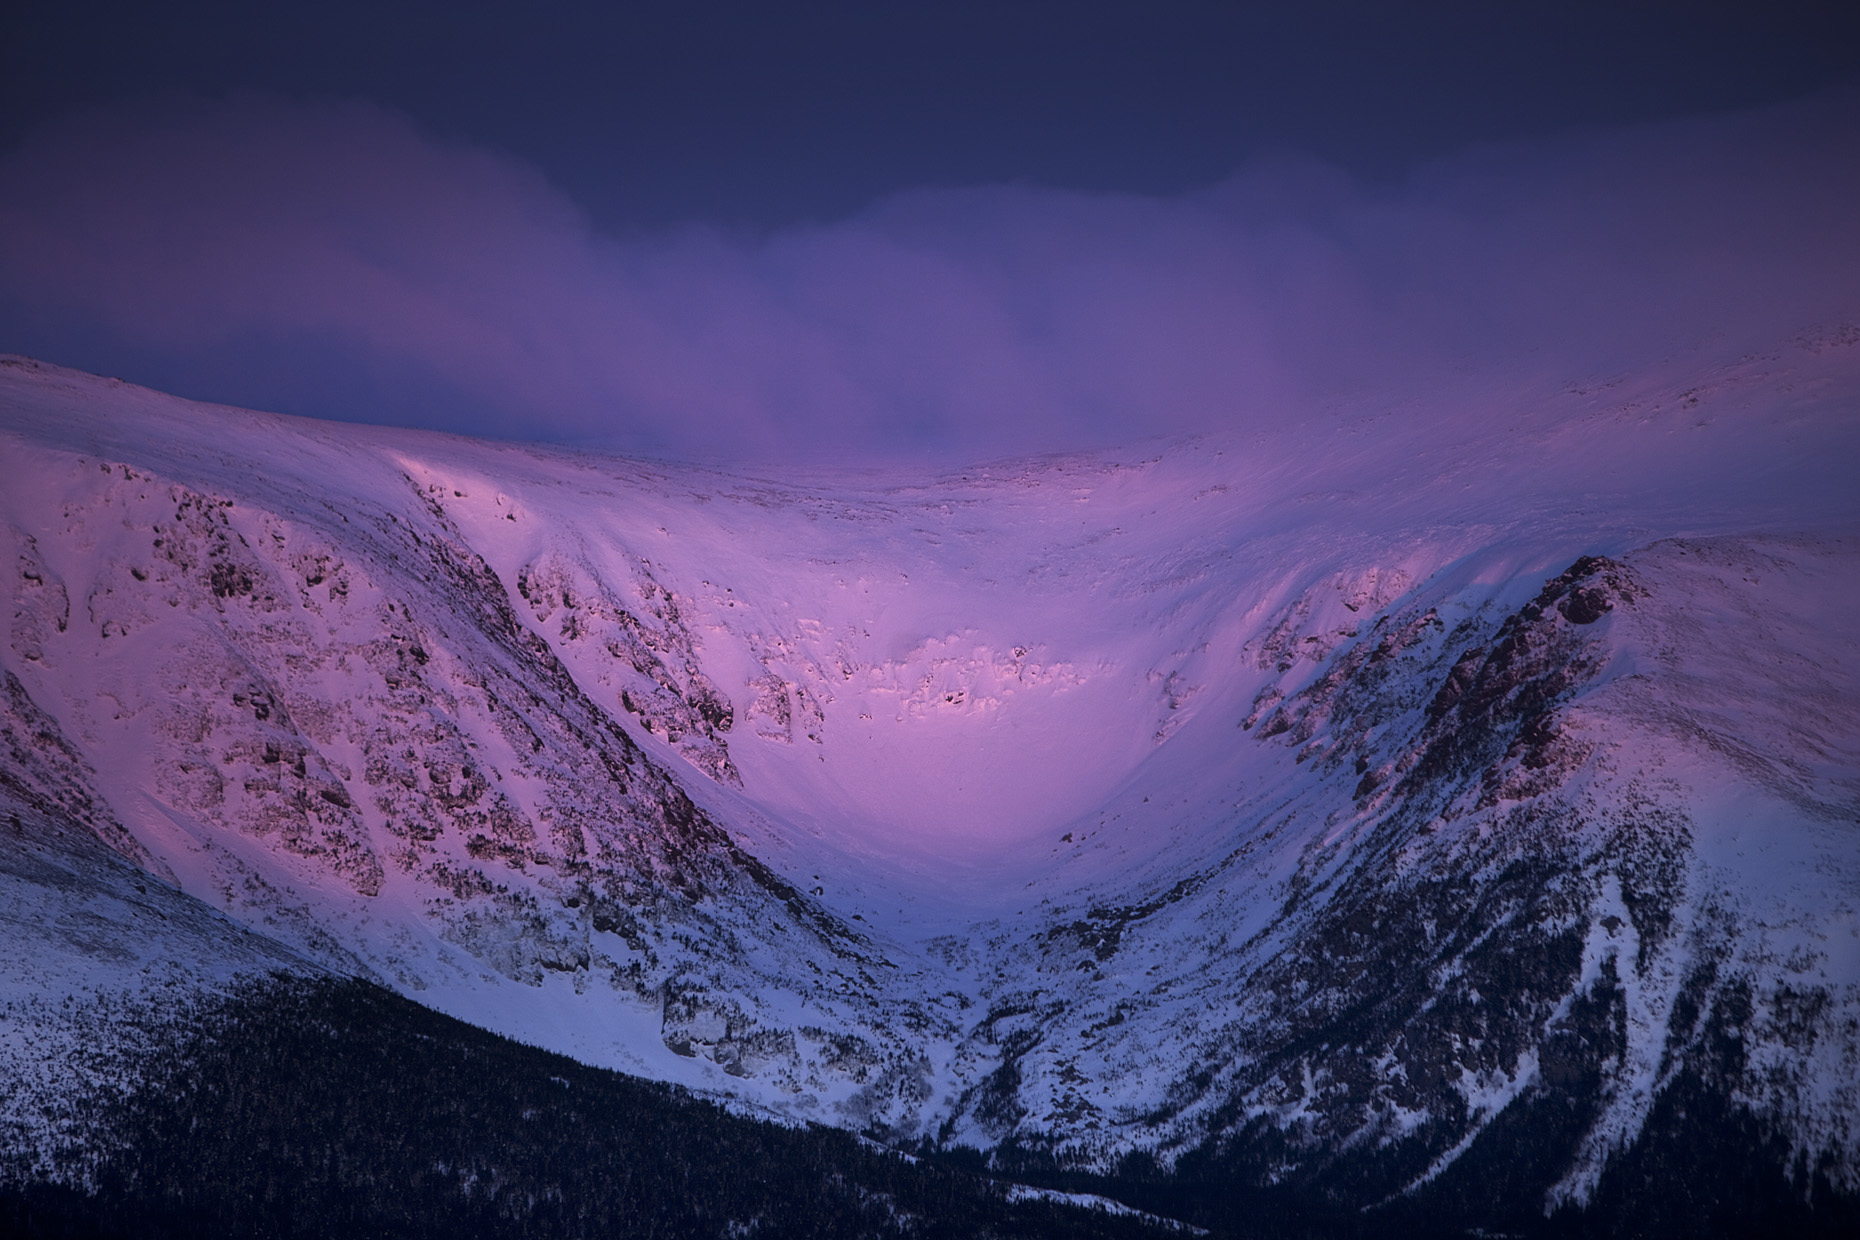 Tuckerman Ravine purple sunrise by New Hampshire based commercial outdoor photographer Brian Nevins